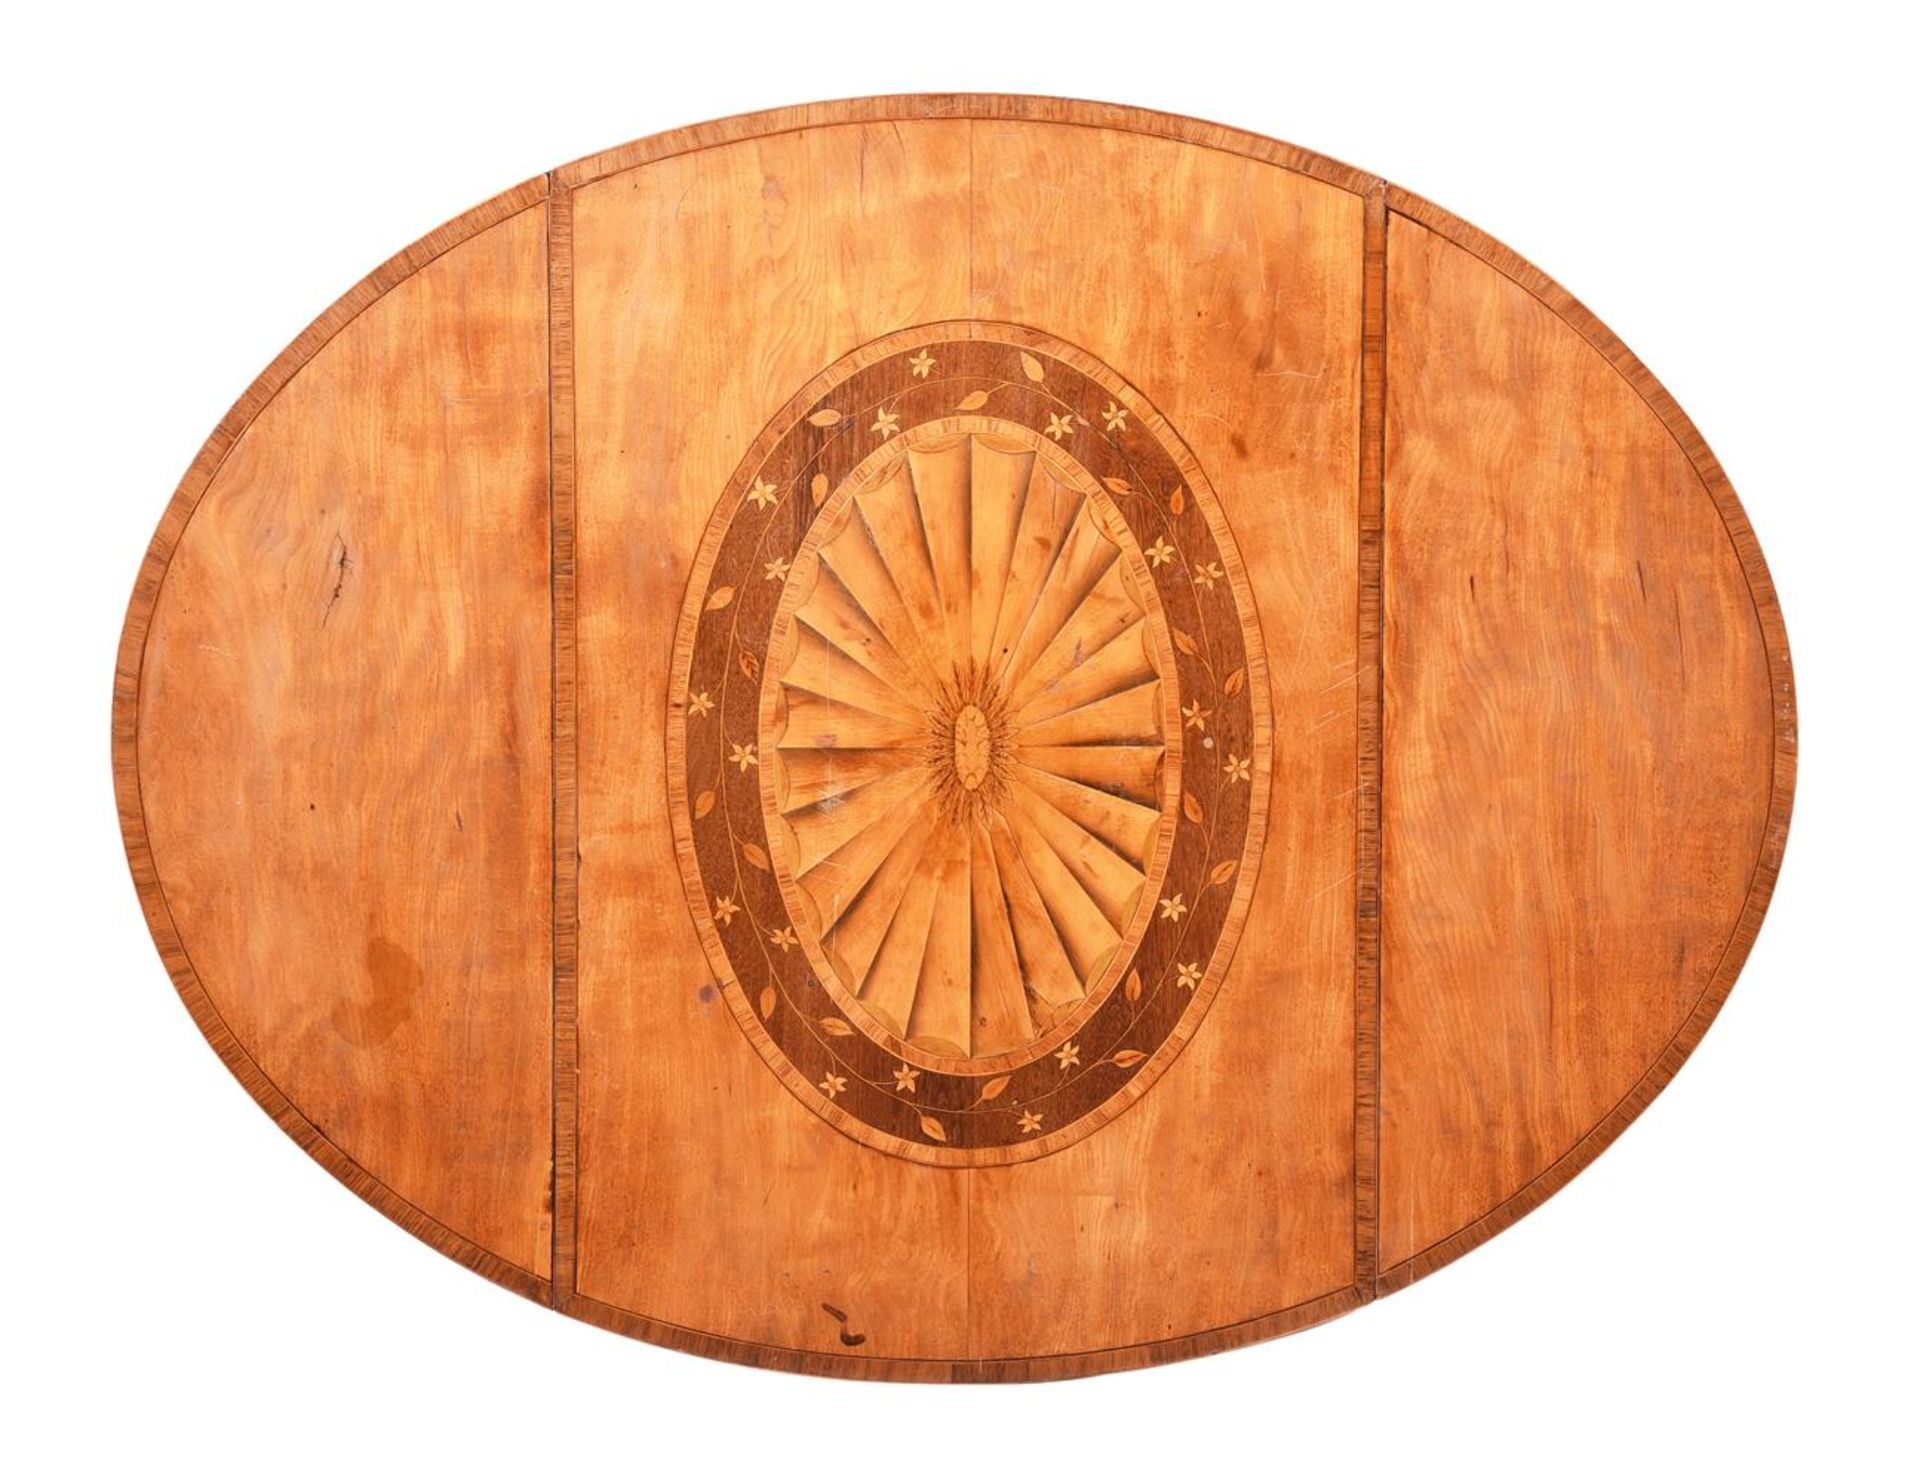 Y A GEORGE III SATINWOOD AND MARQUETRY PEMBROKE TABLE, LATE 18TH CENTURY - Image 3 of 6